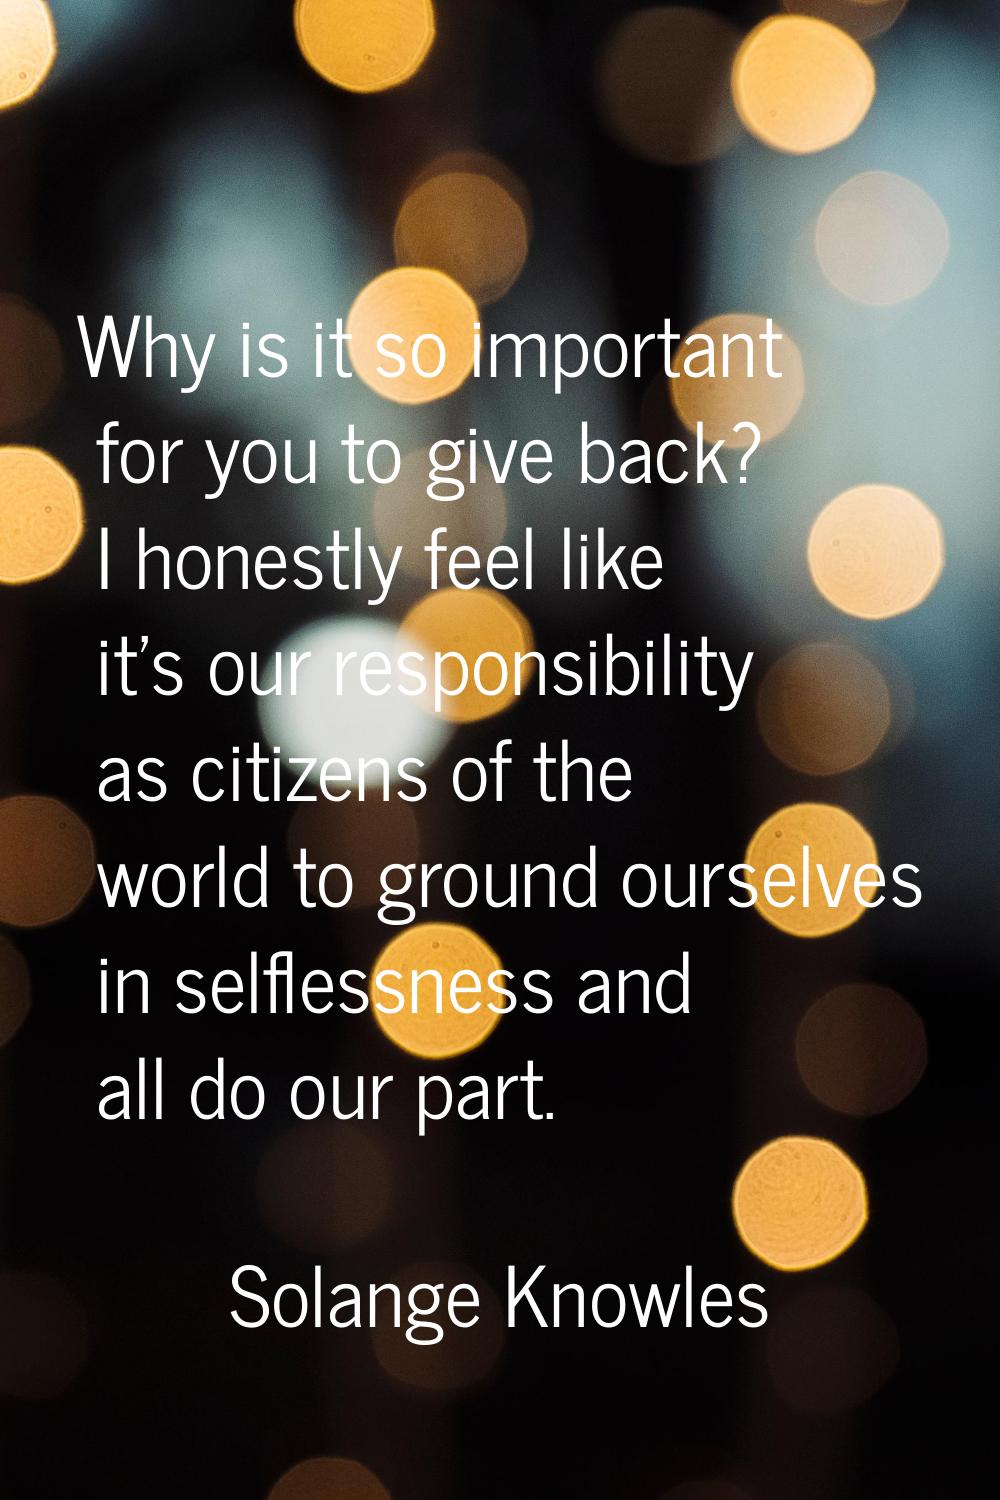 Why is it so important for you to give back? I honestly feel like it's our responsibility as citize